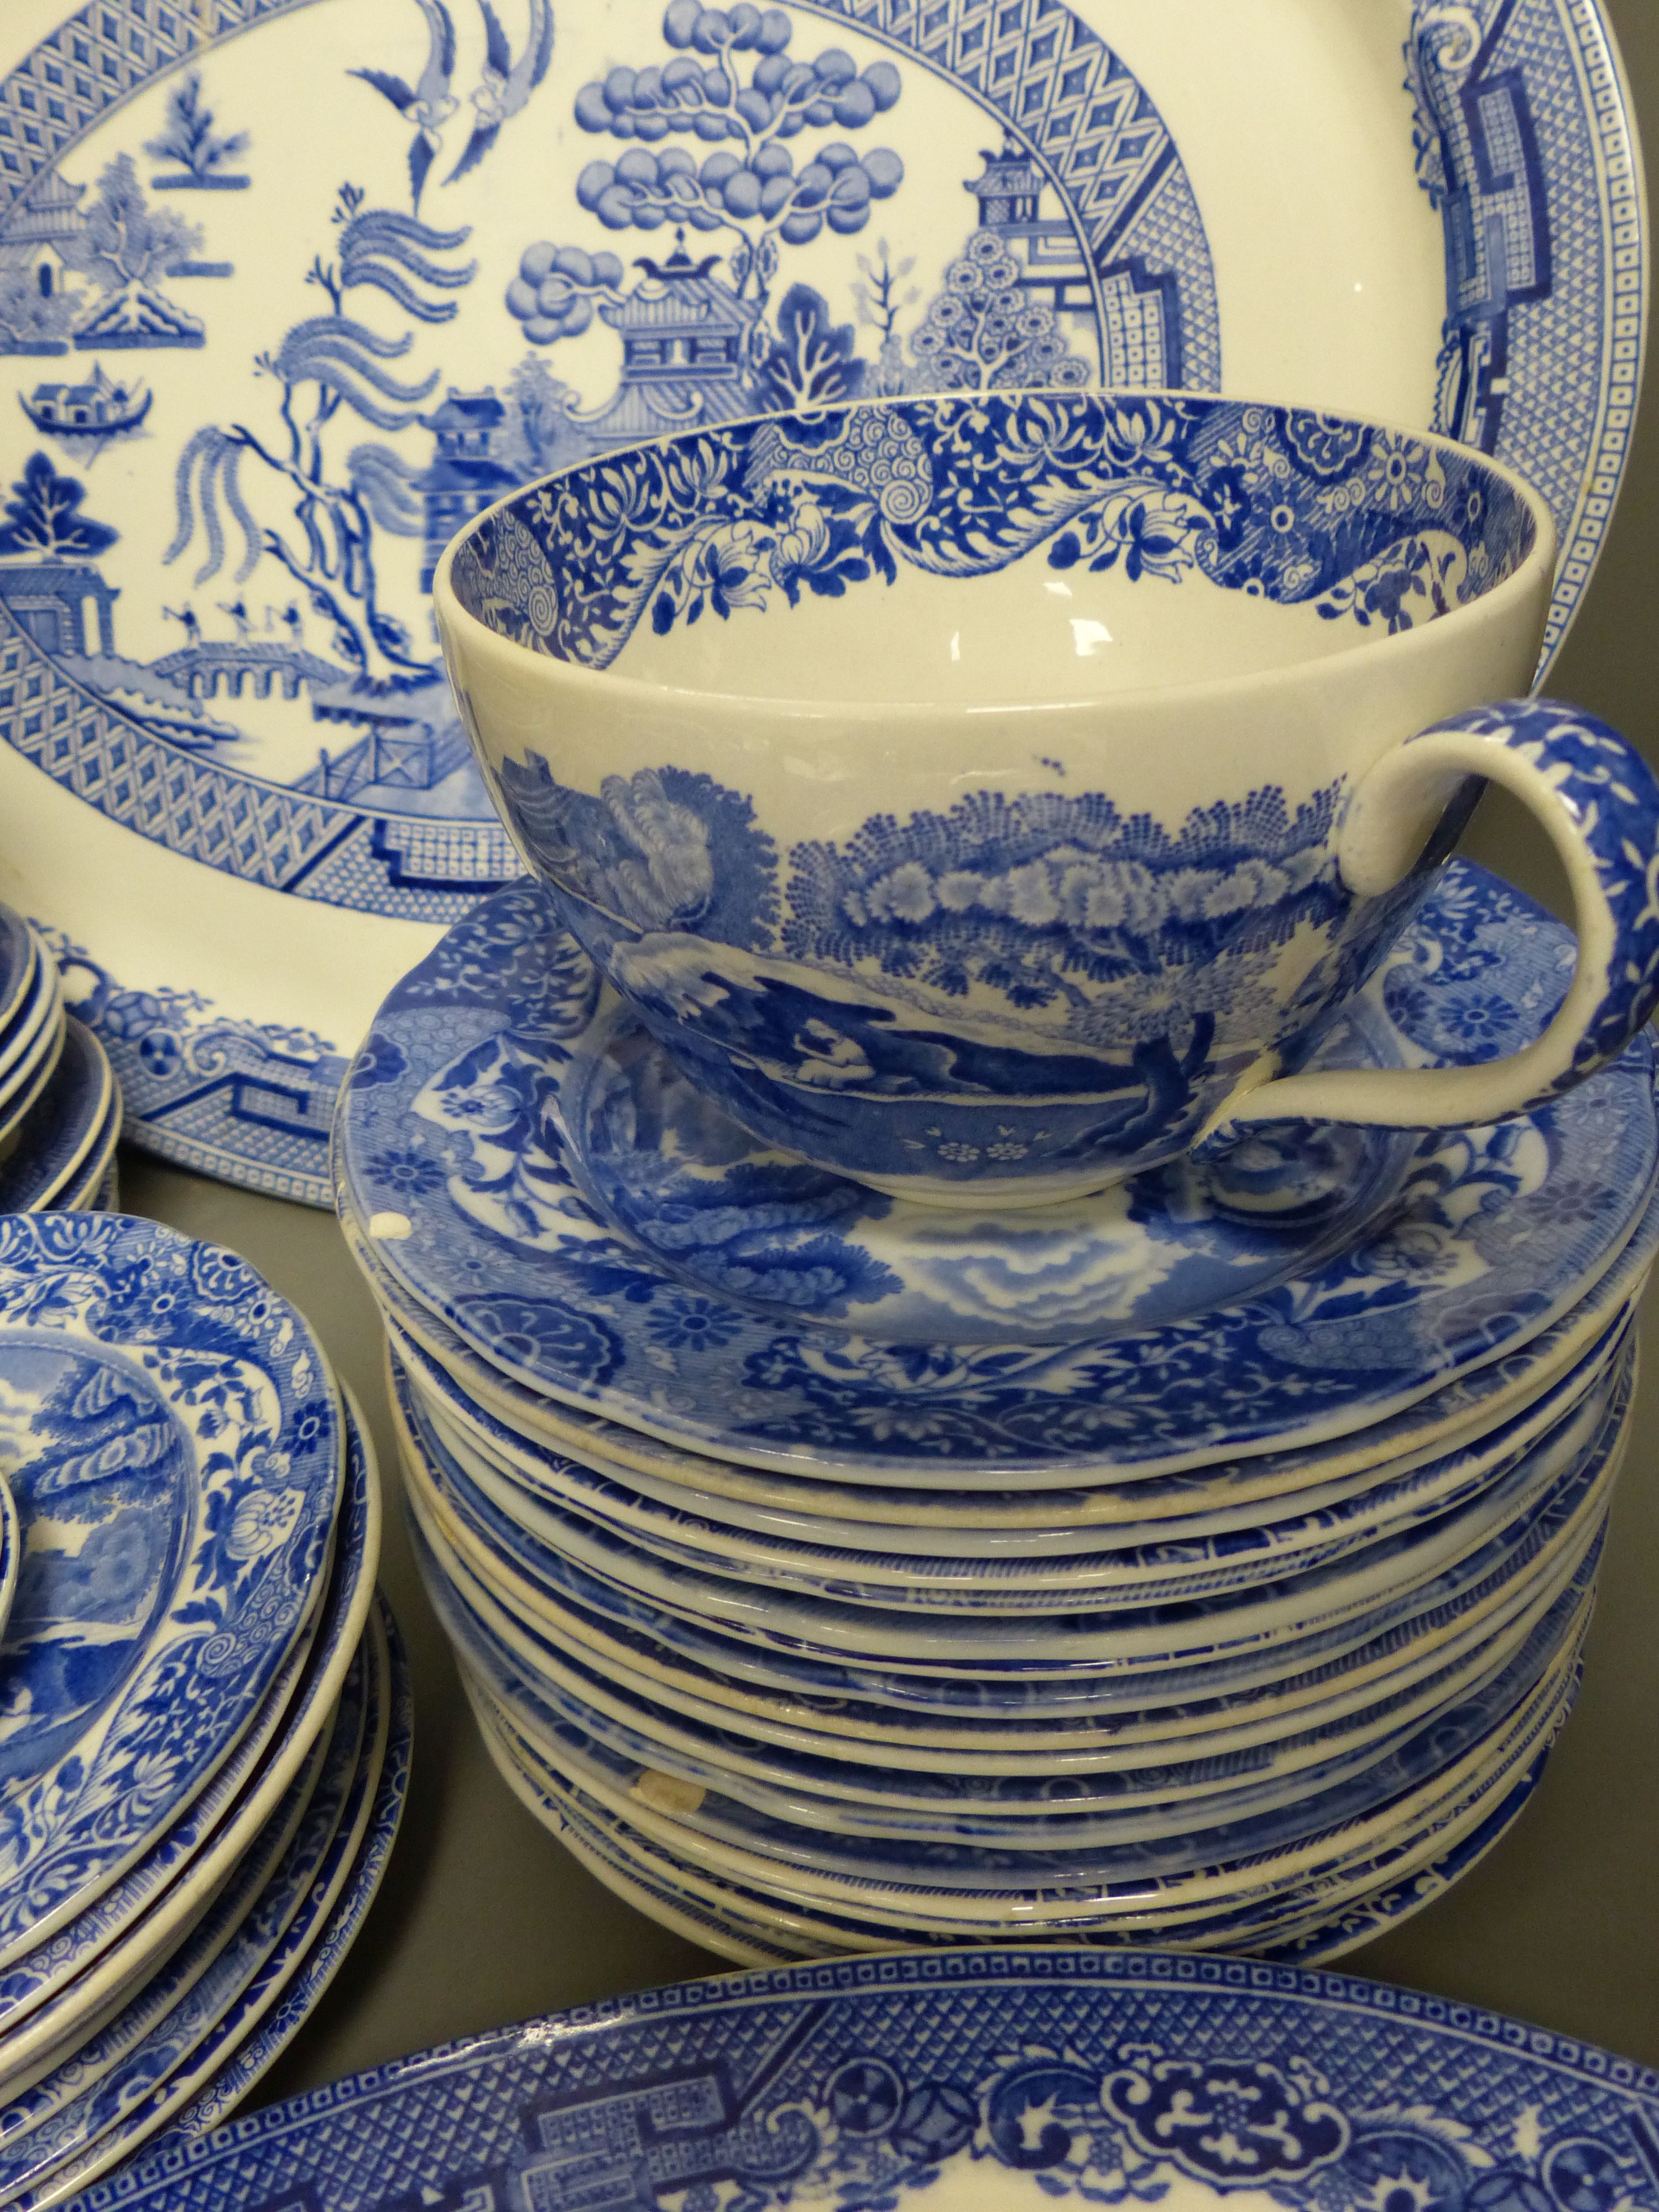 A quantity of blue and white ceramics including Copeland Spodes Italian and Willow pattern